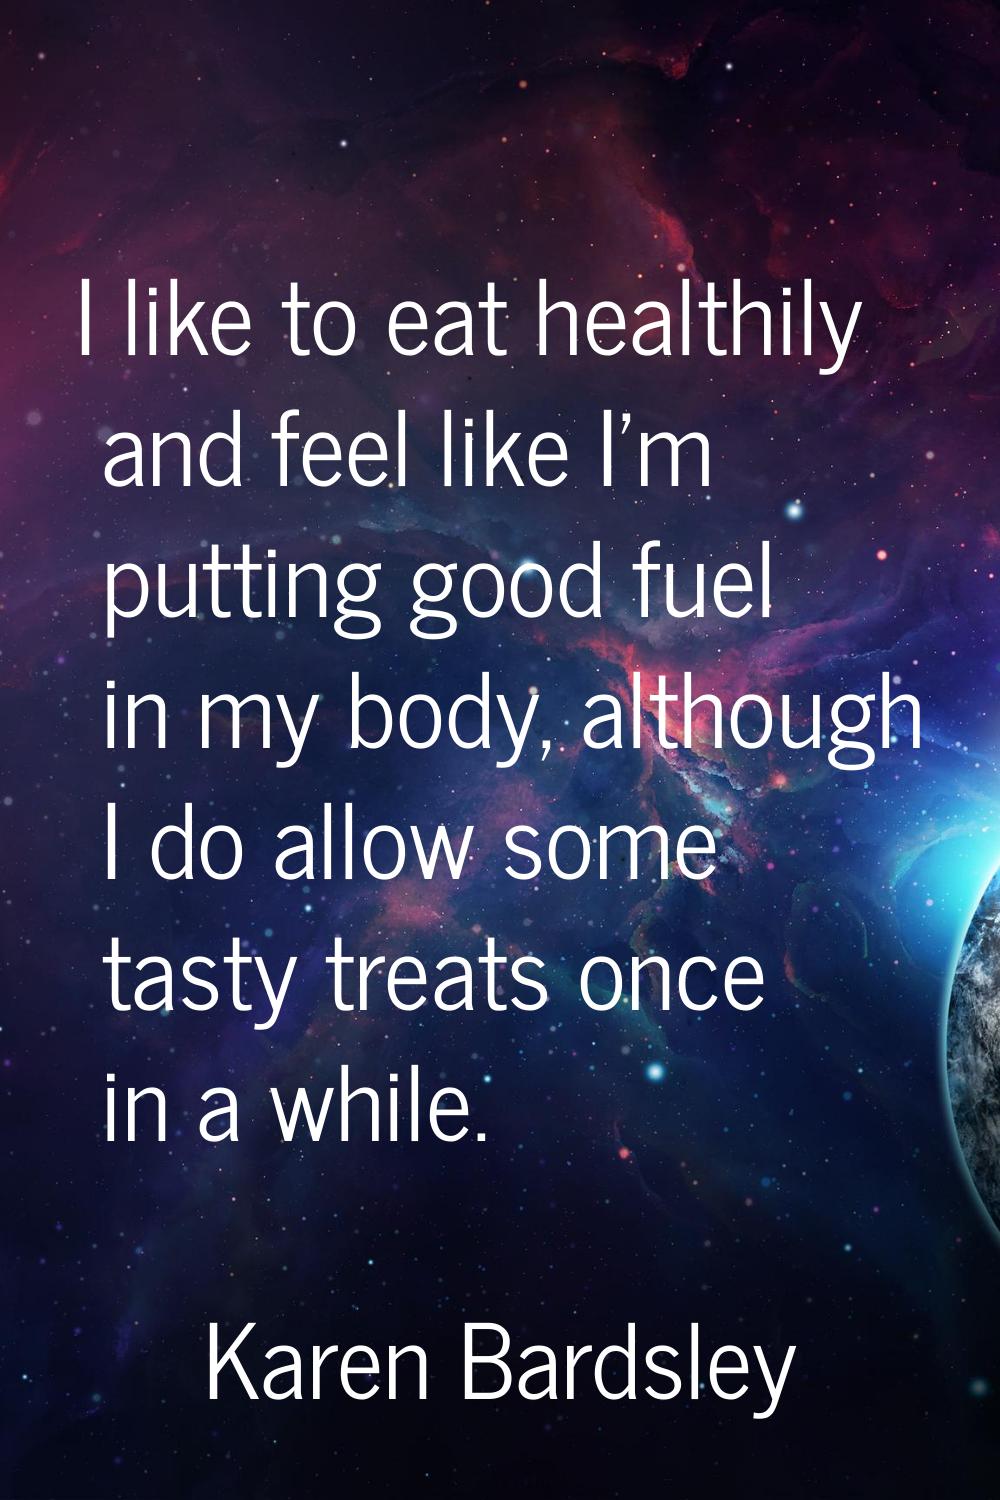 I like to eat healthily and feel like I'm putting good fuel in my body, although I do allow some ta